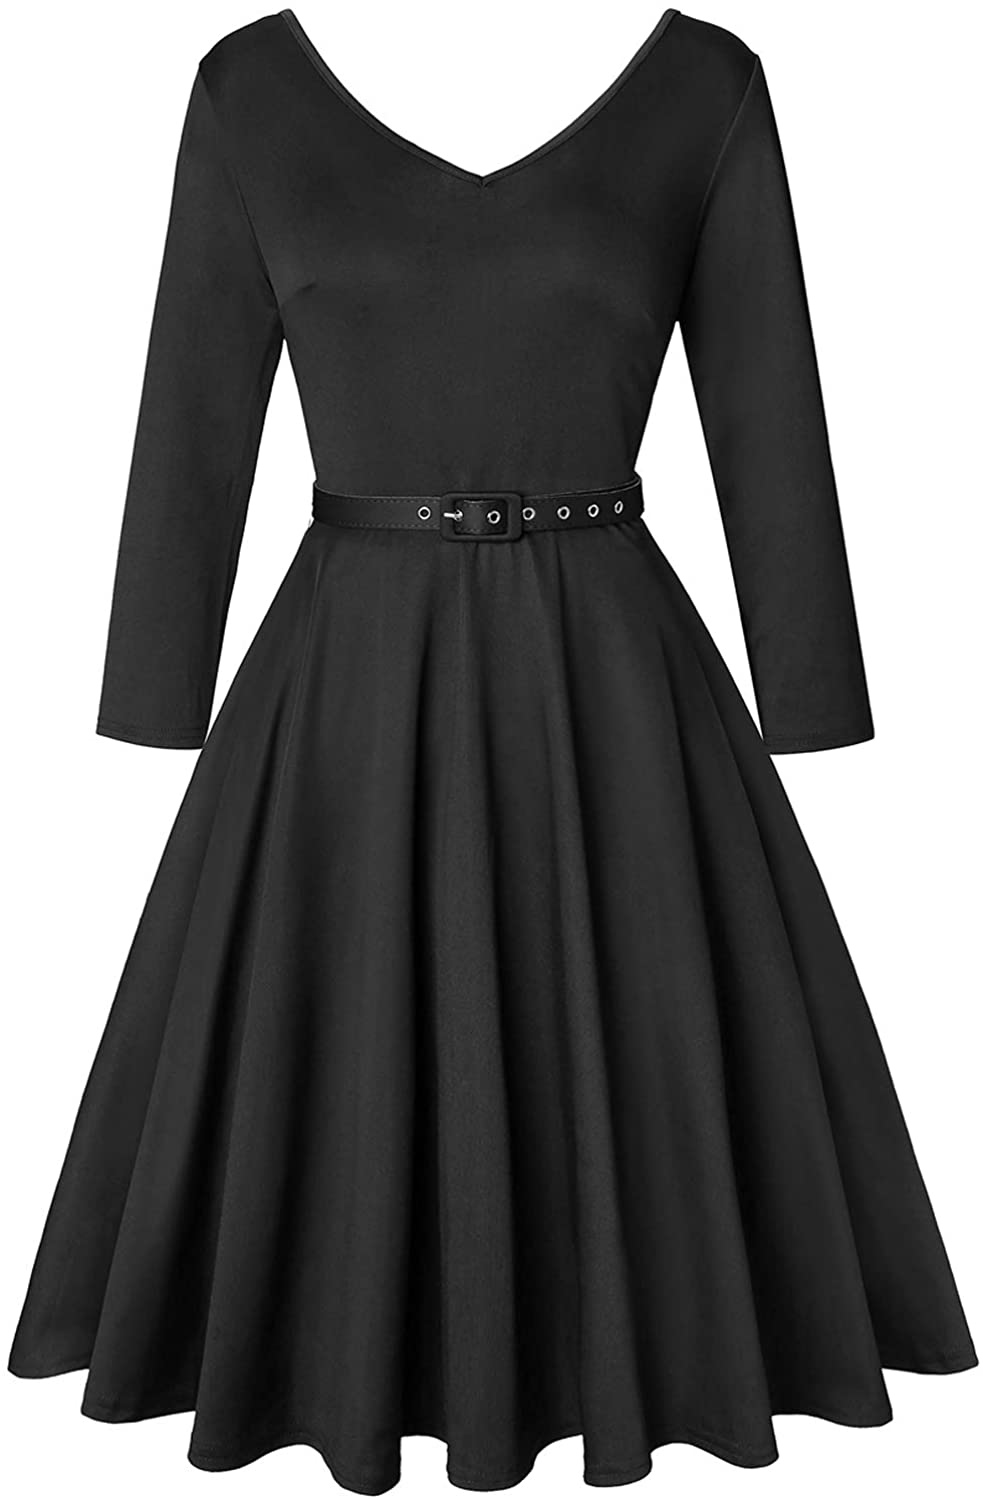 Price:$25.99    ROOSEY Women’s Vintage Retro V Neck Cocktail Party Wedding Formal Swing Dress with Belt  Clothing